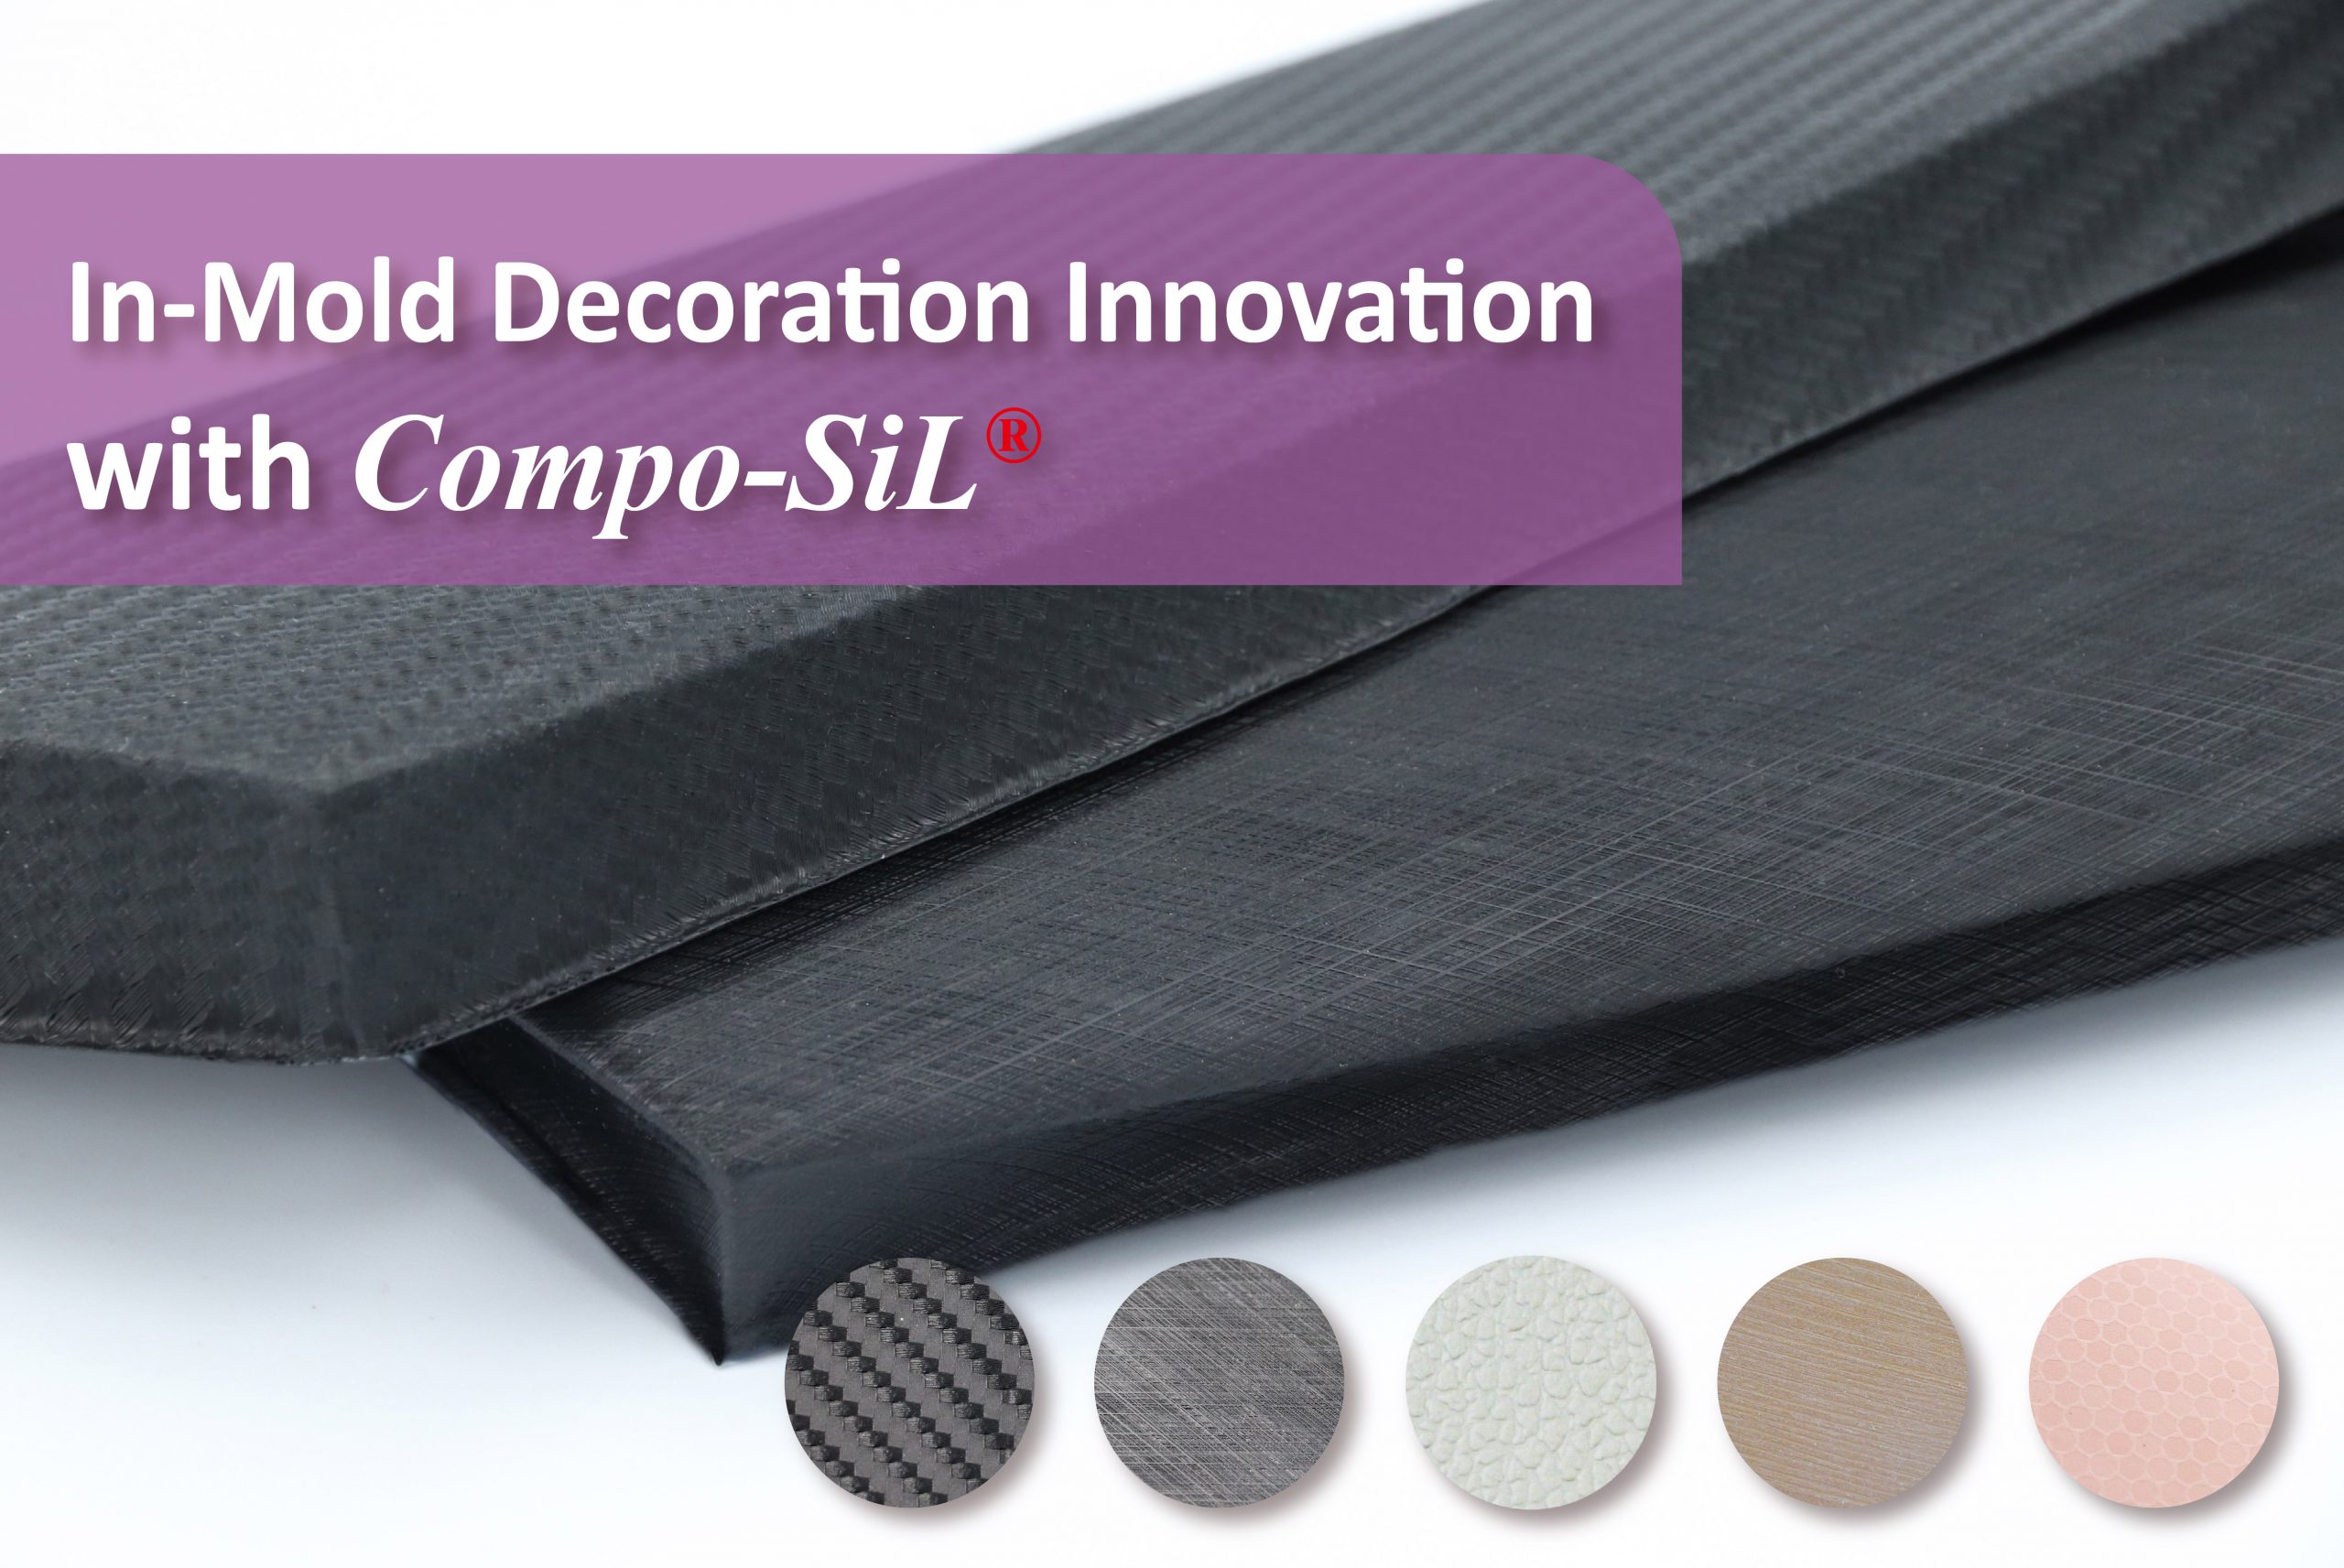 Halogen Free Flame Retardant Sheets and Surface Materials Innovation Through Compo-SiL®